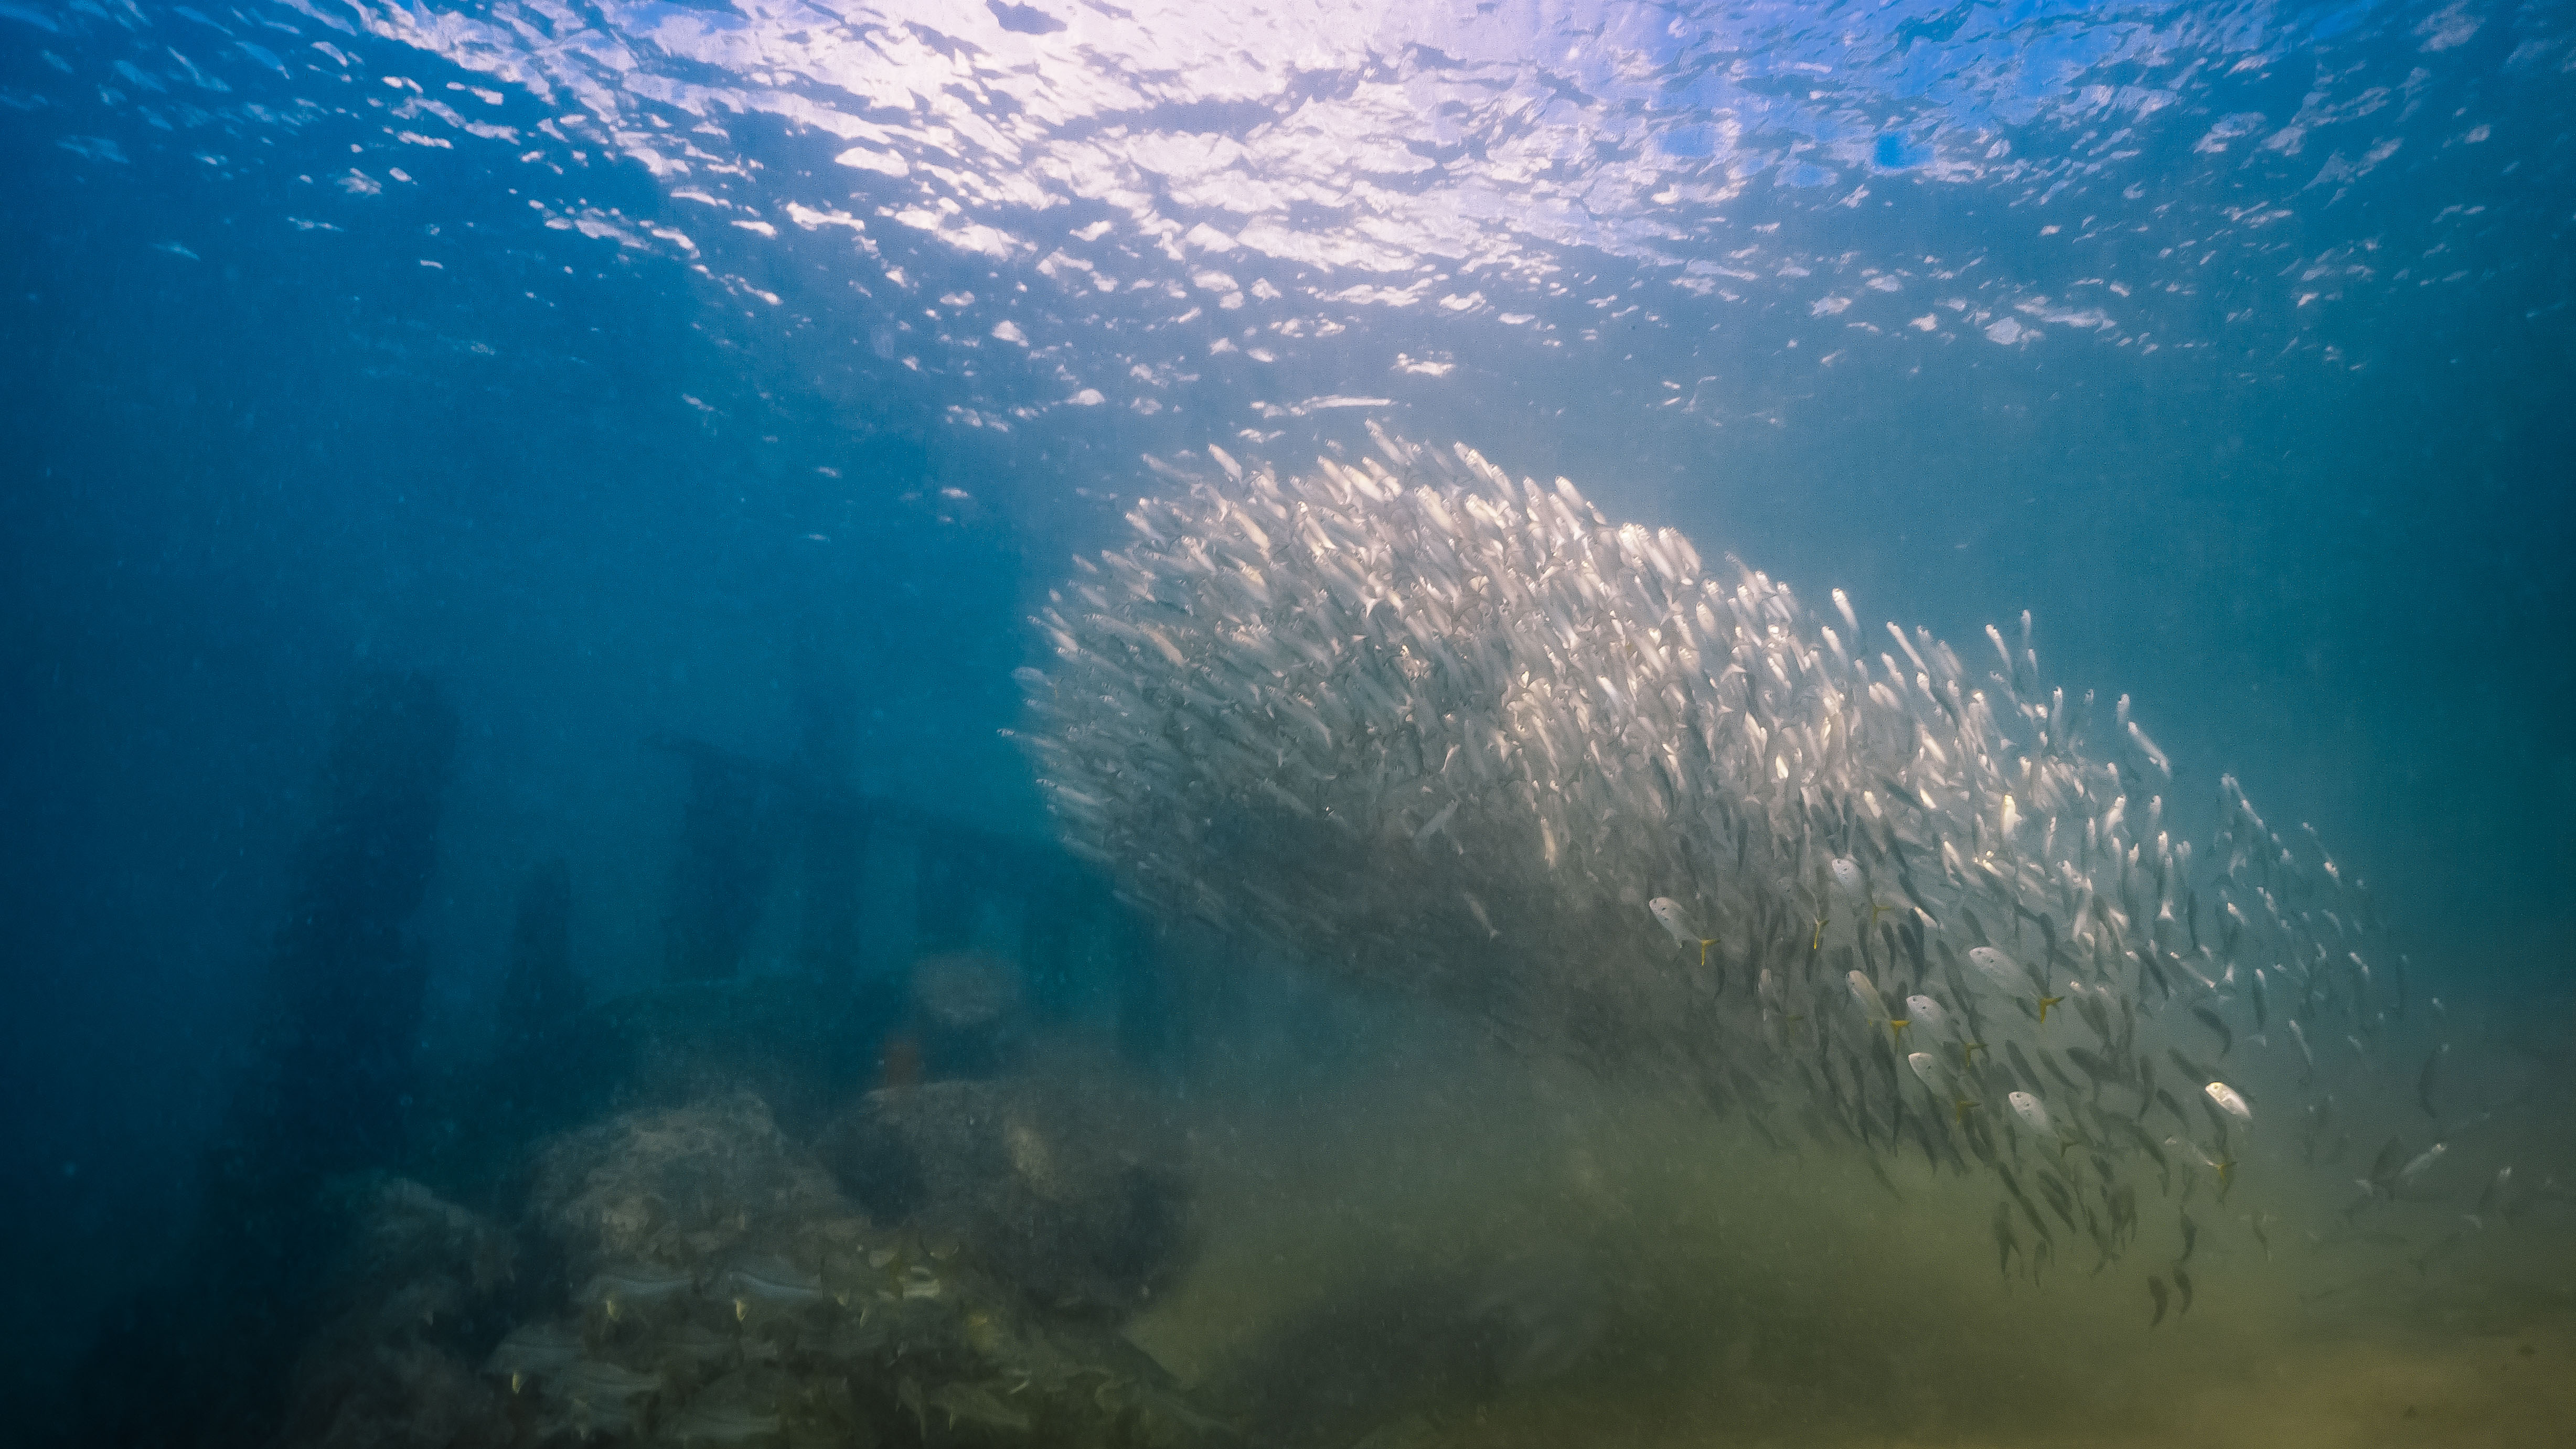 An unseen predator probably drove the Crevalle Jacks in the right foreground to join this bait ball of mullet. Many gatherings of fish are based not on species but size, so that no fish stands out to hungry predators. A group of spawning snook (lower left) lies below the bait ball. Because of its abundance, Florida is known as the "Fishing Capital of the World."